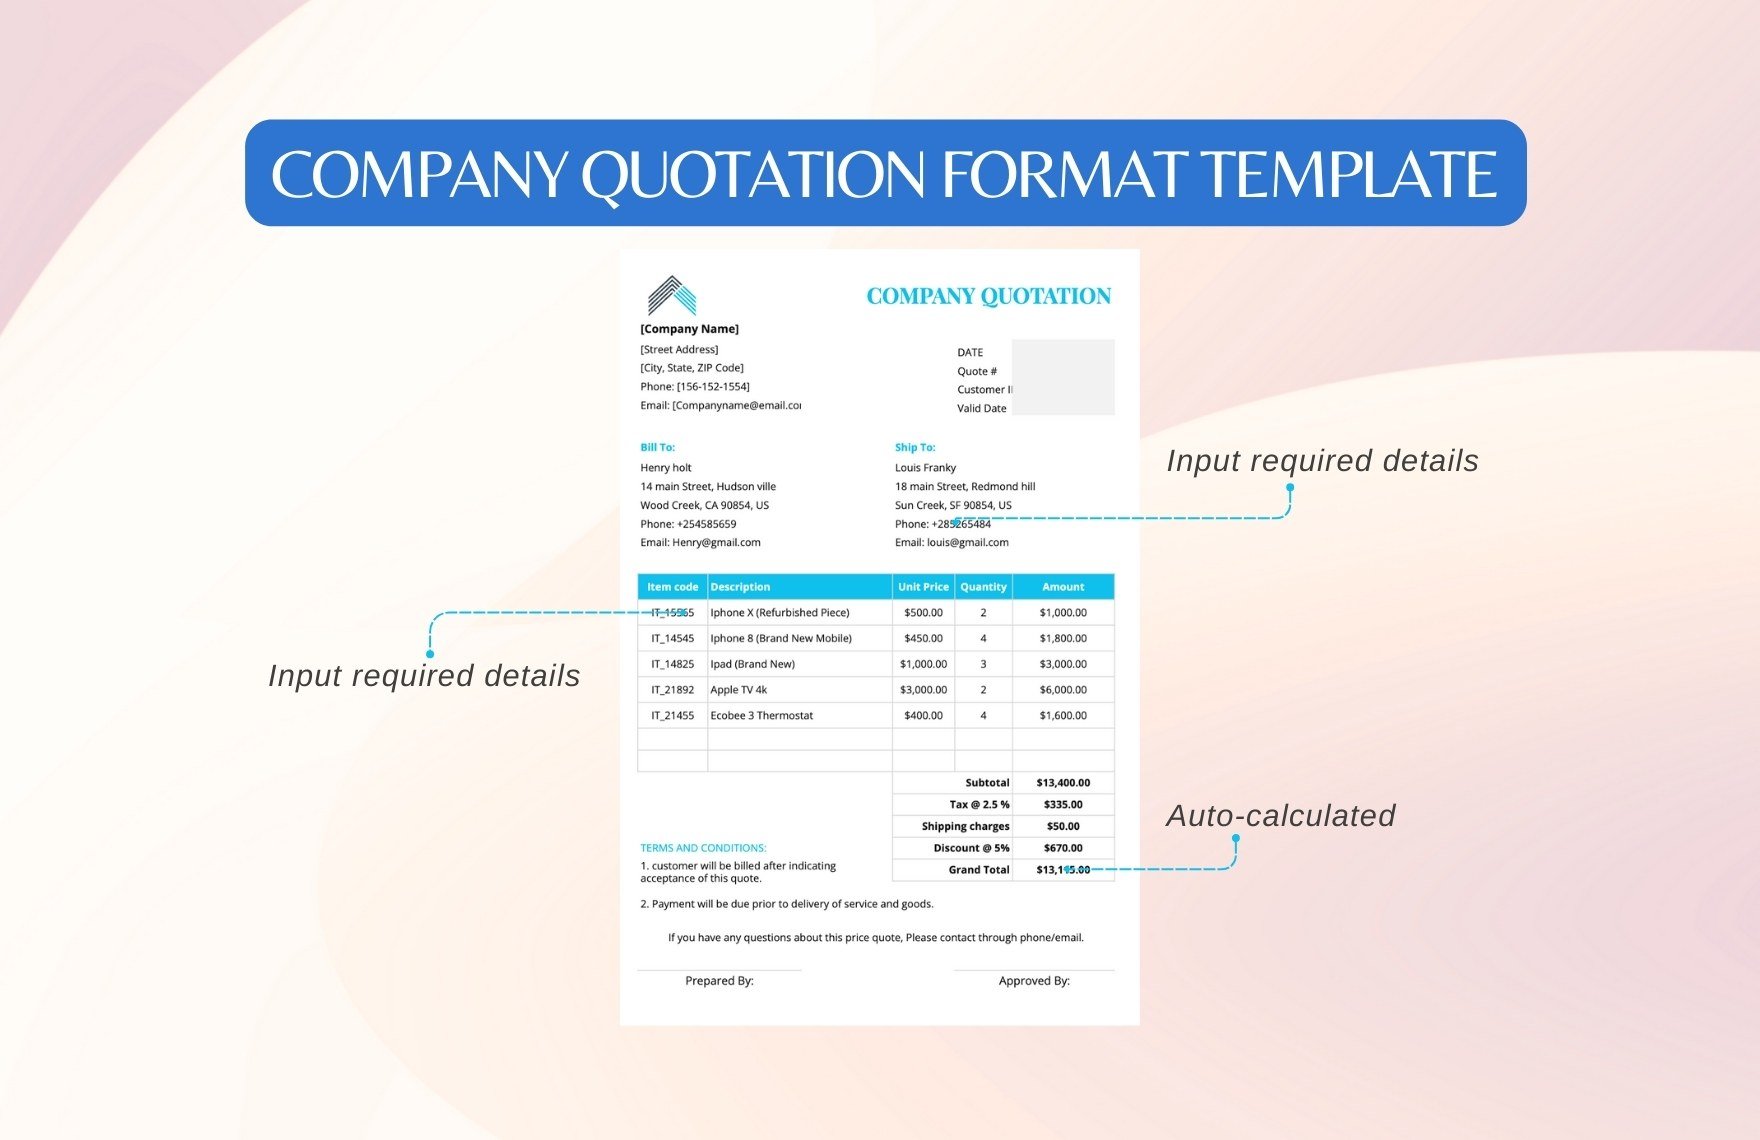 Company Quotation Format Template